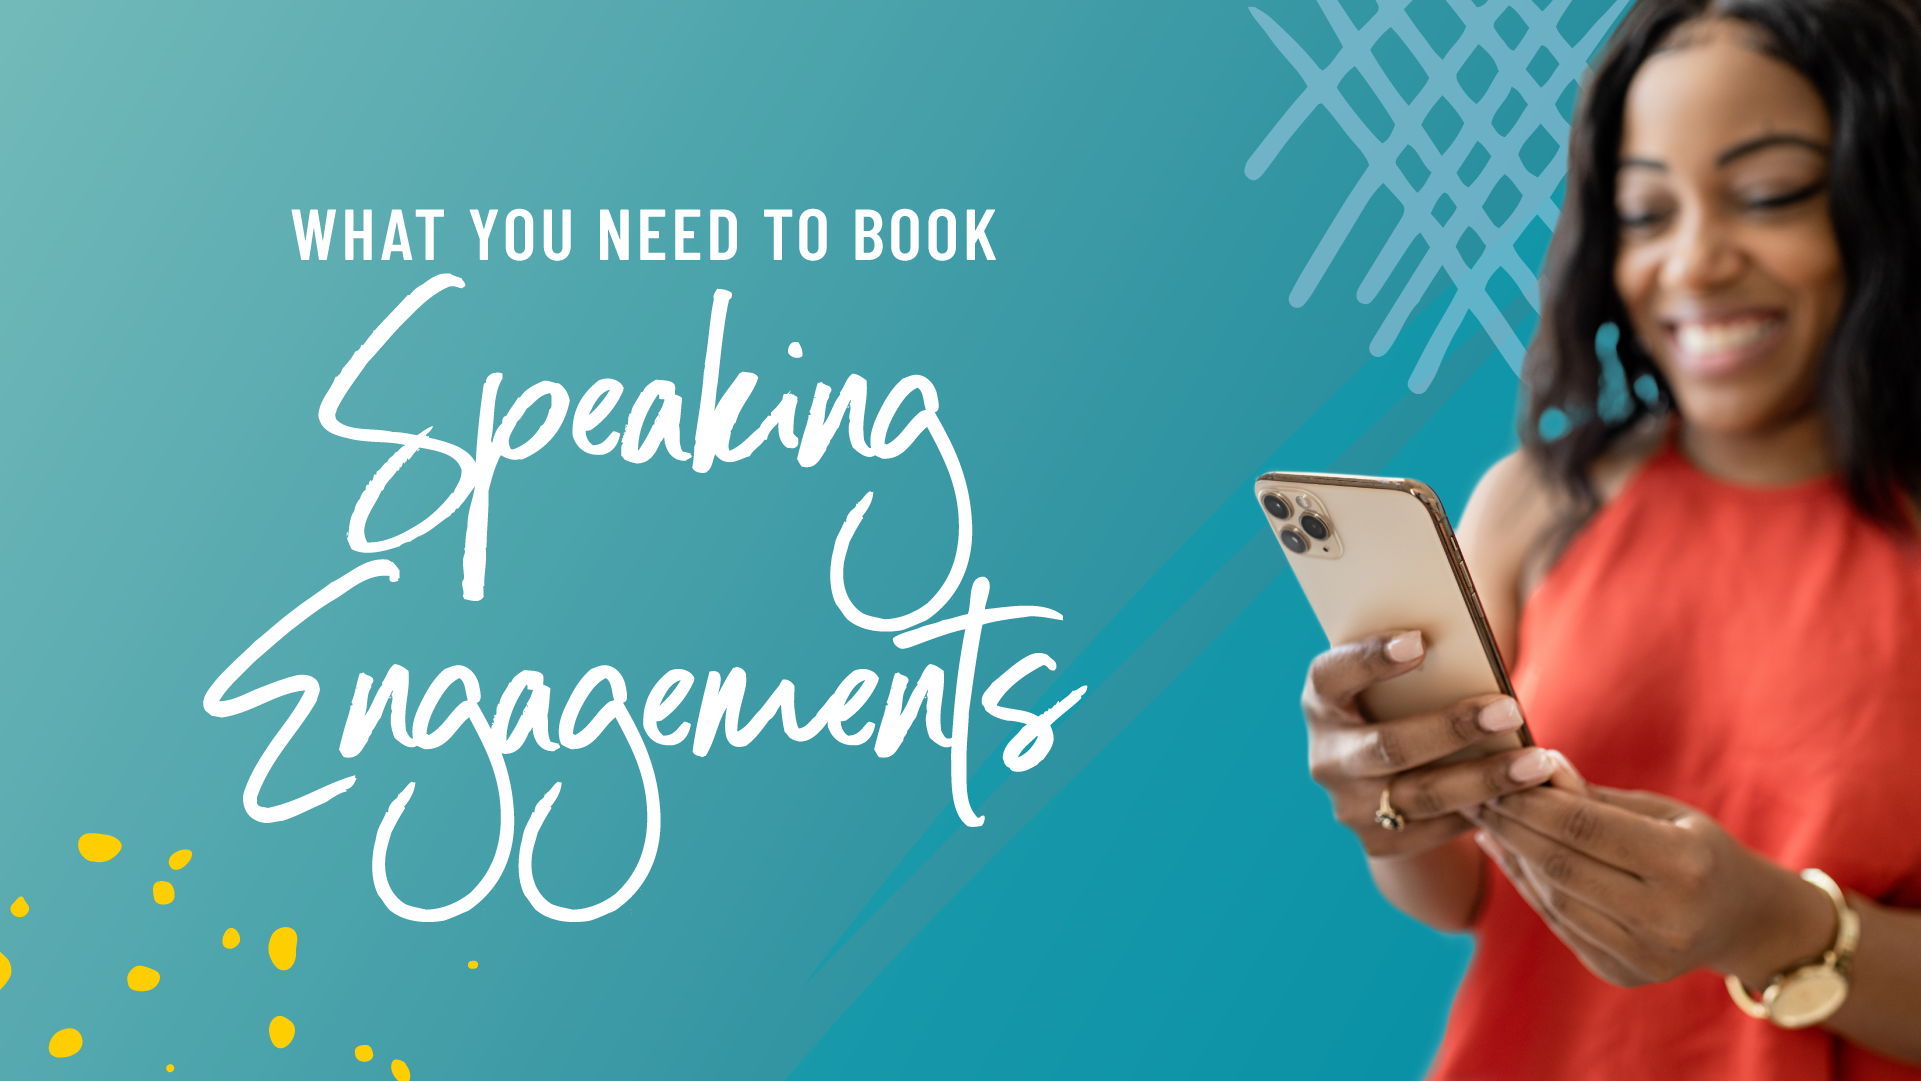 How to Find and Book Speaking Gigs